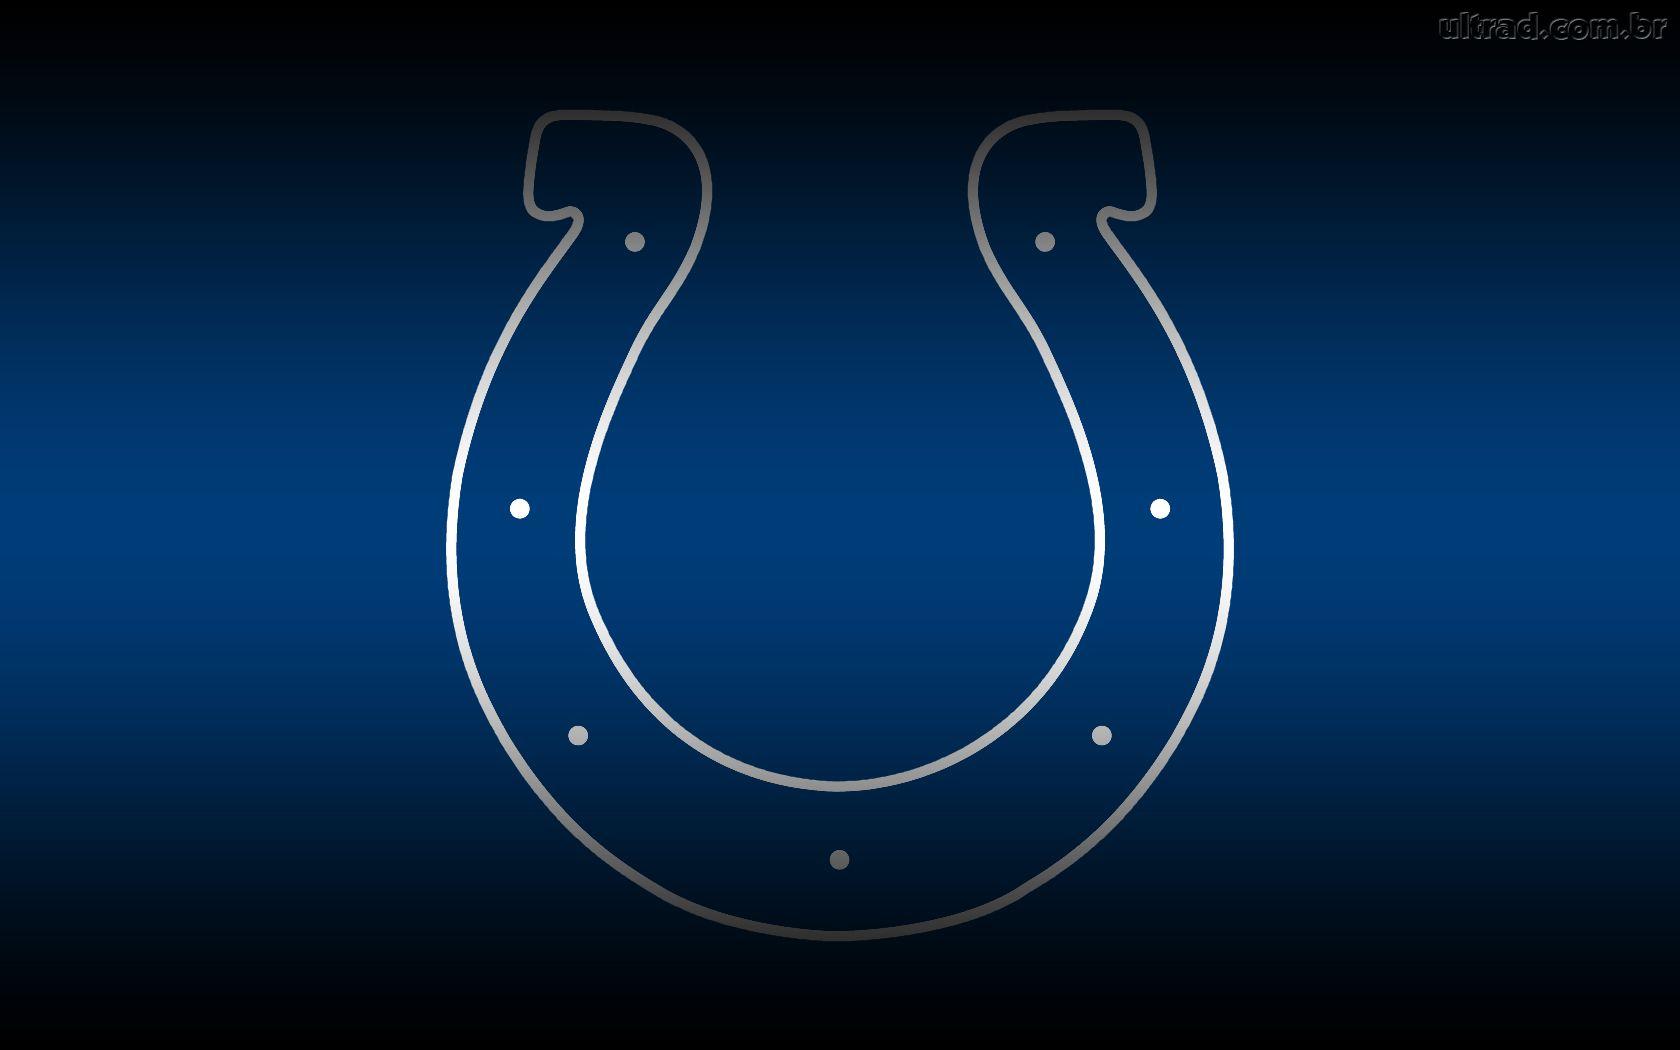 More Indianapolis Colts wallpapers wallpapers